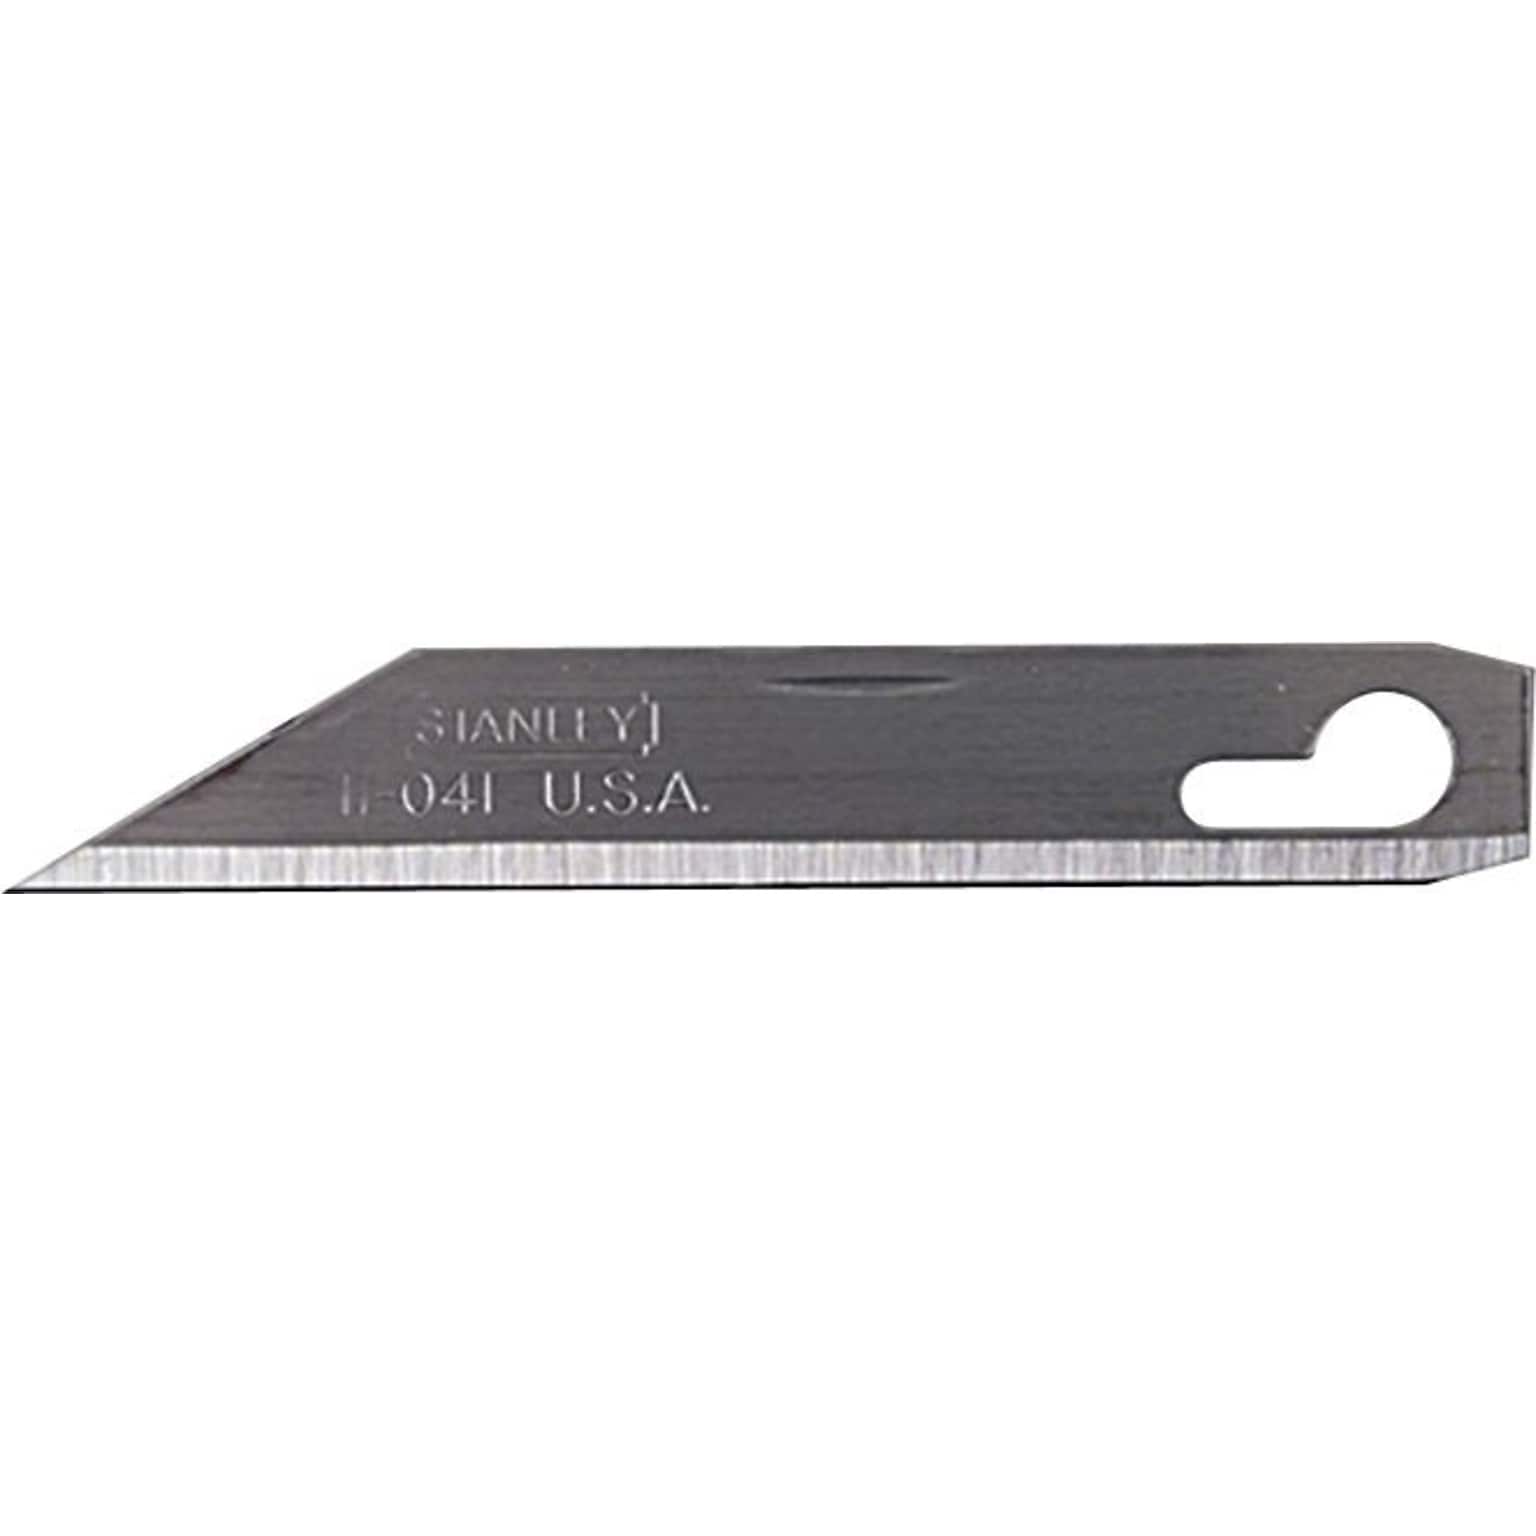 Stanley® Utility Pocket Knife Blades, Stainless Steel